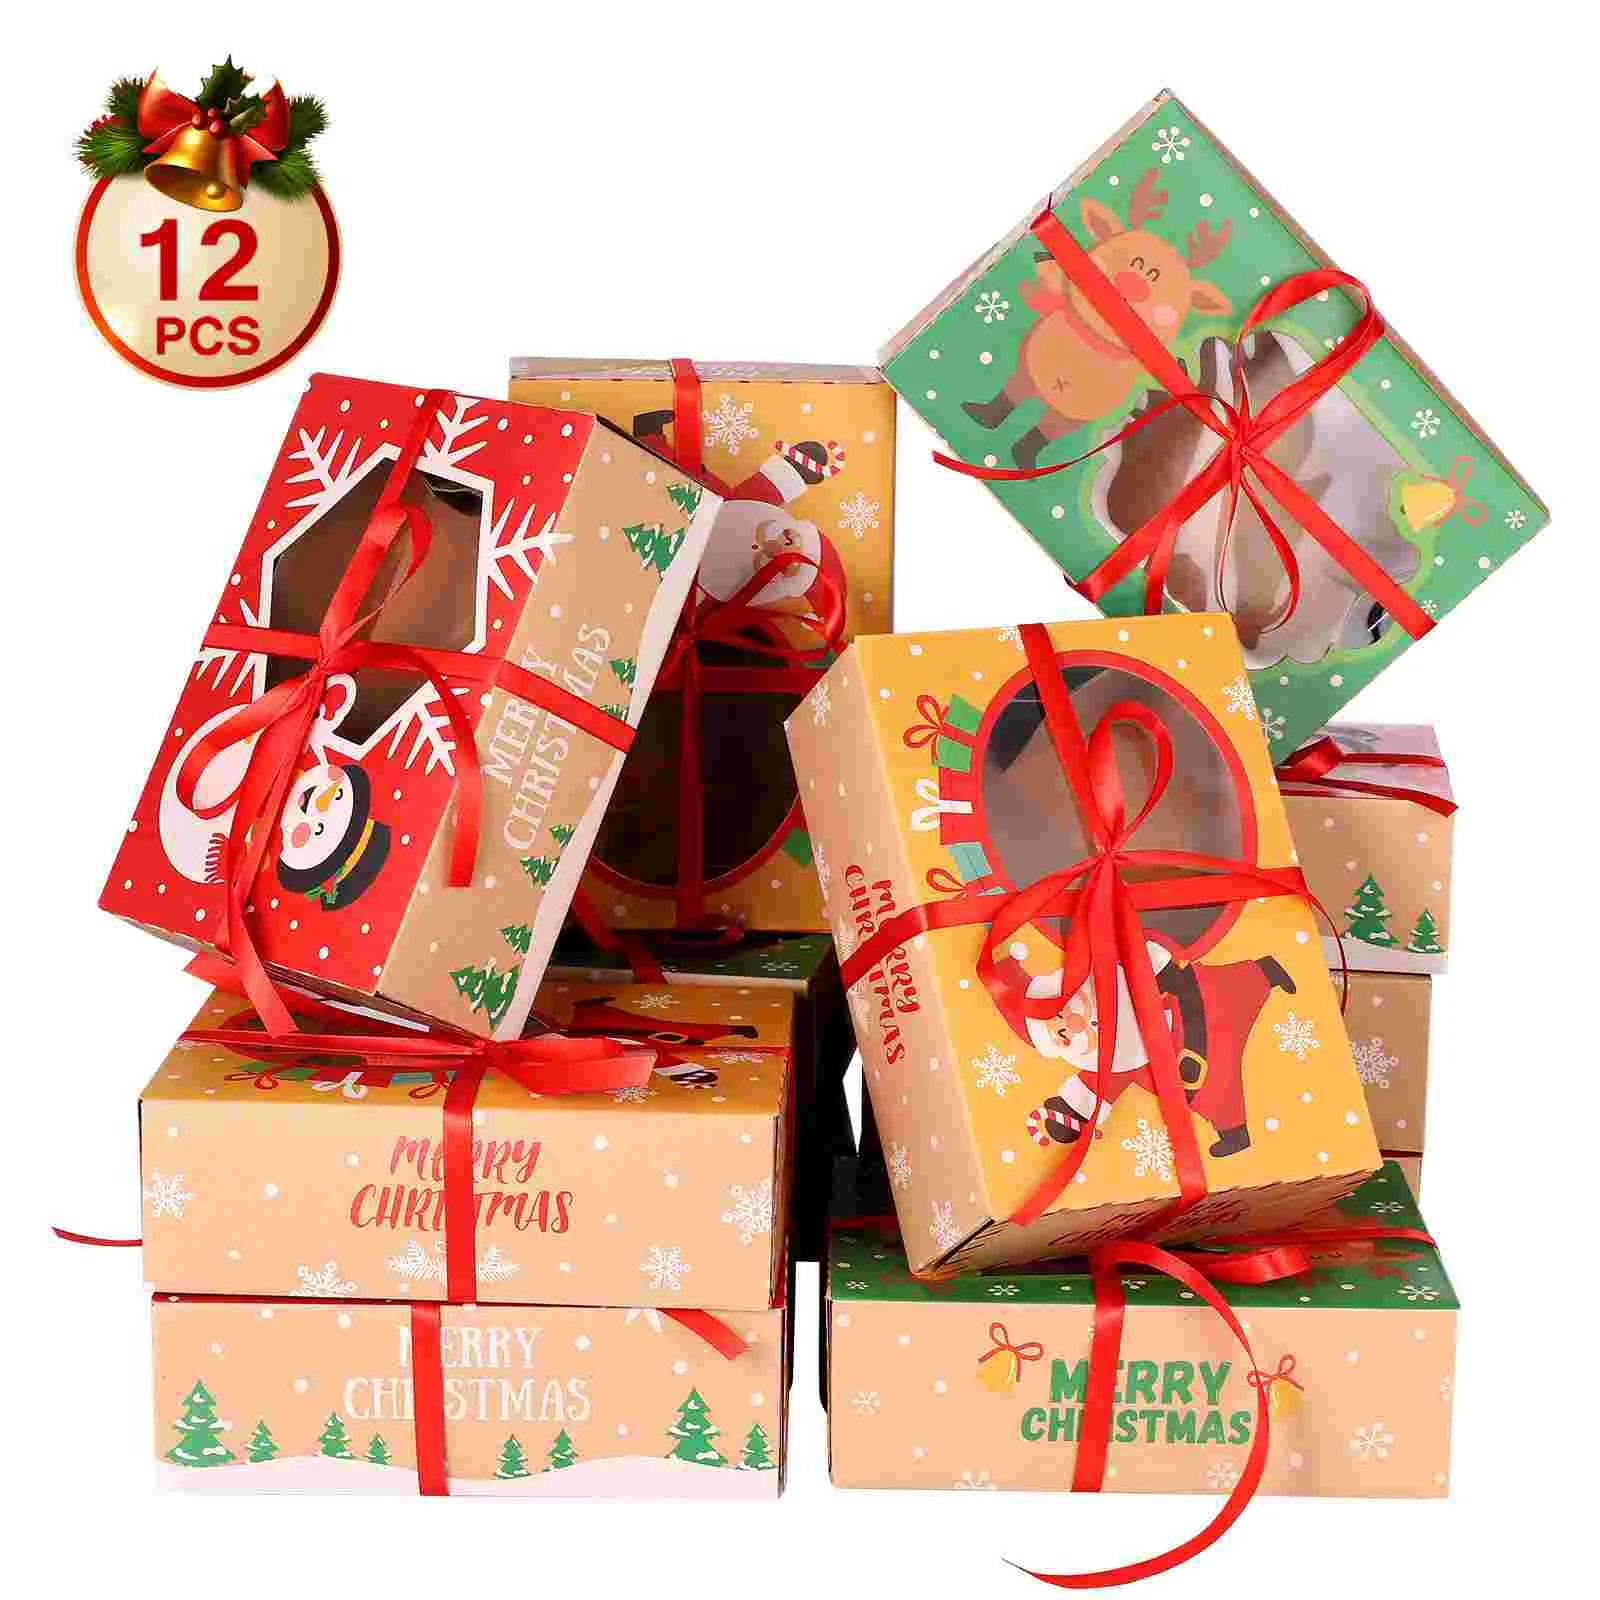 

12pcs Christmas Cookie Boxes Kraft Paper Christmas Candy Treat Boxes Party Favor Boxes Xmas Holiday Party Supplies New year's